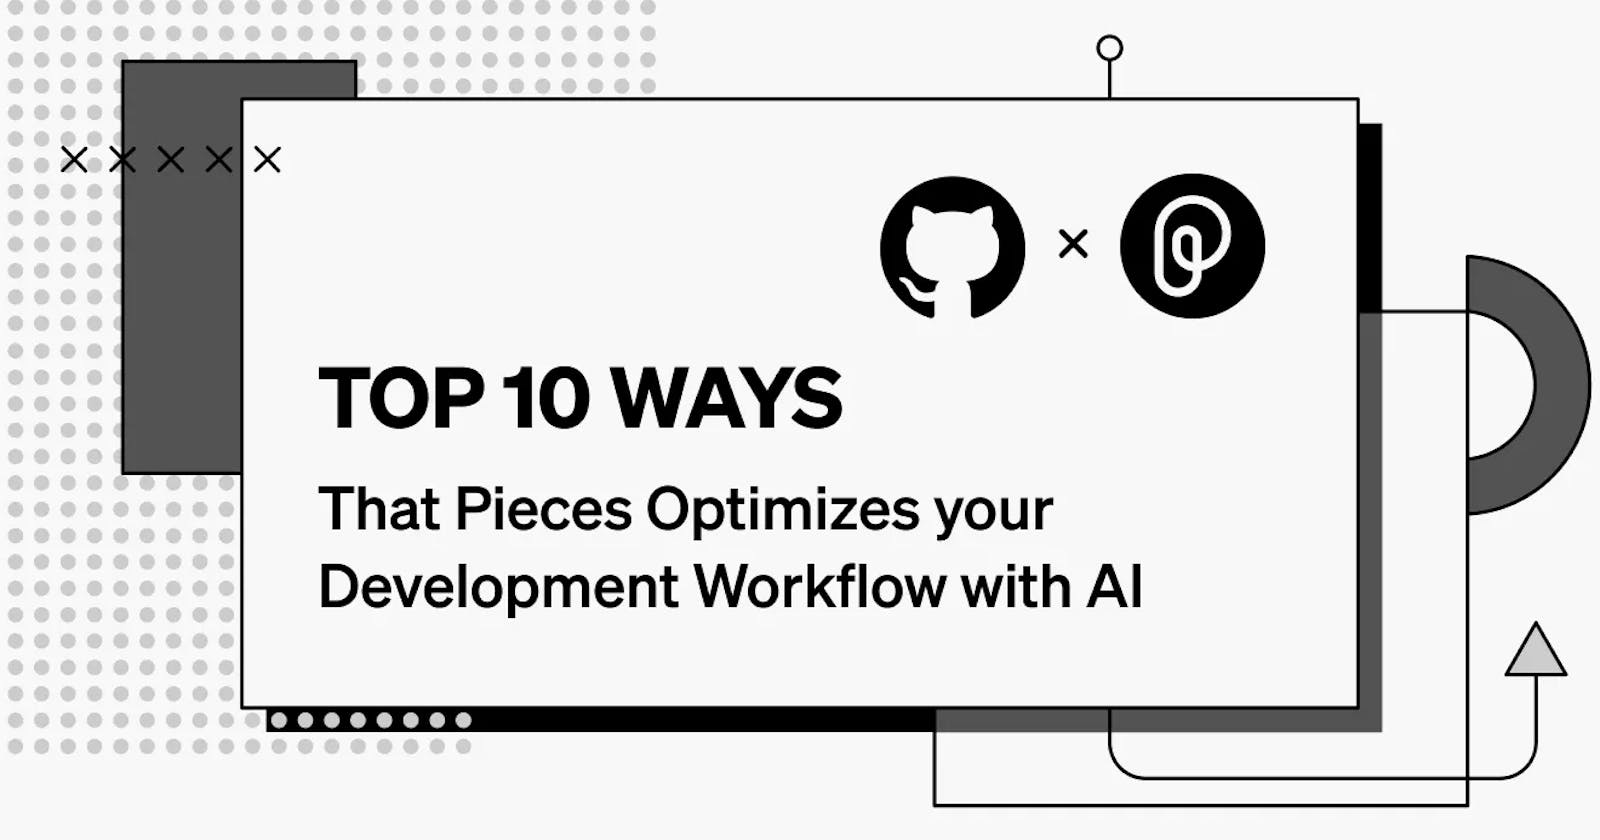 GitHub + Pieces: Top 10 Ways Pieces Optimizes Your Development Workflow with AI